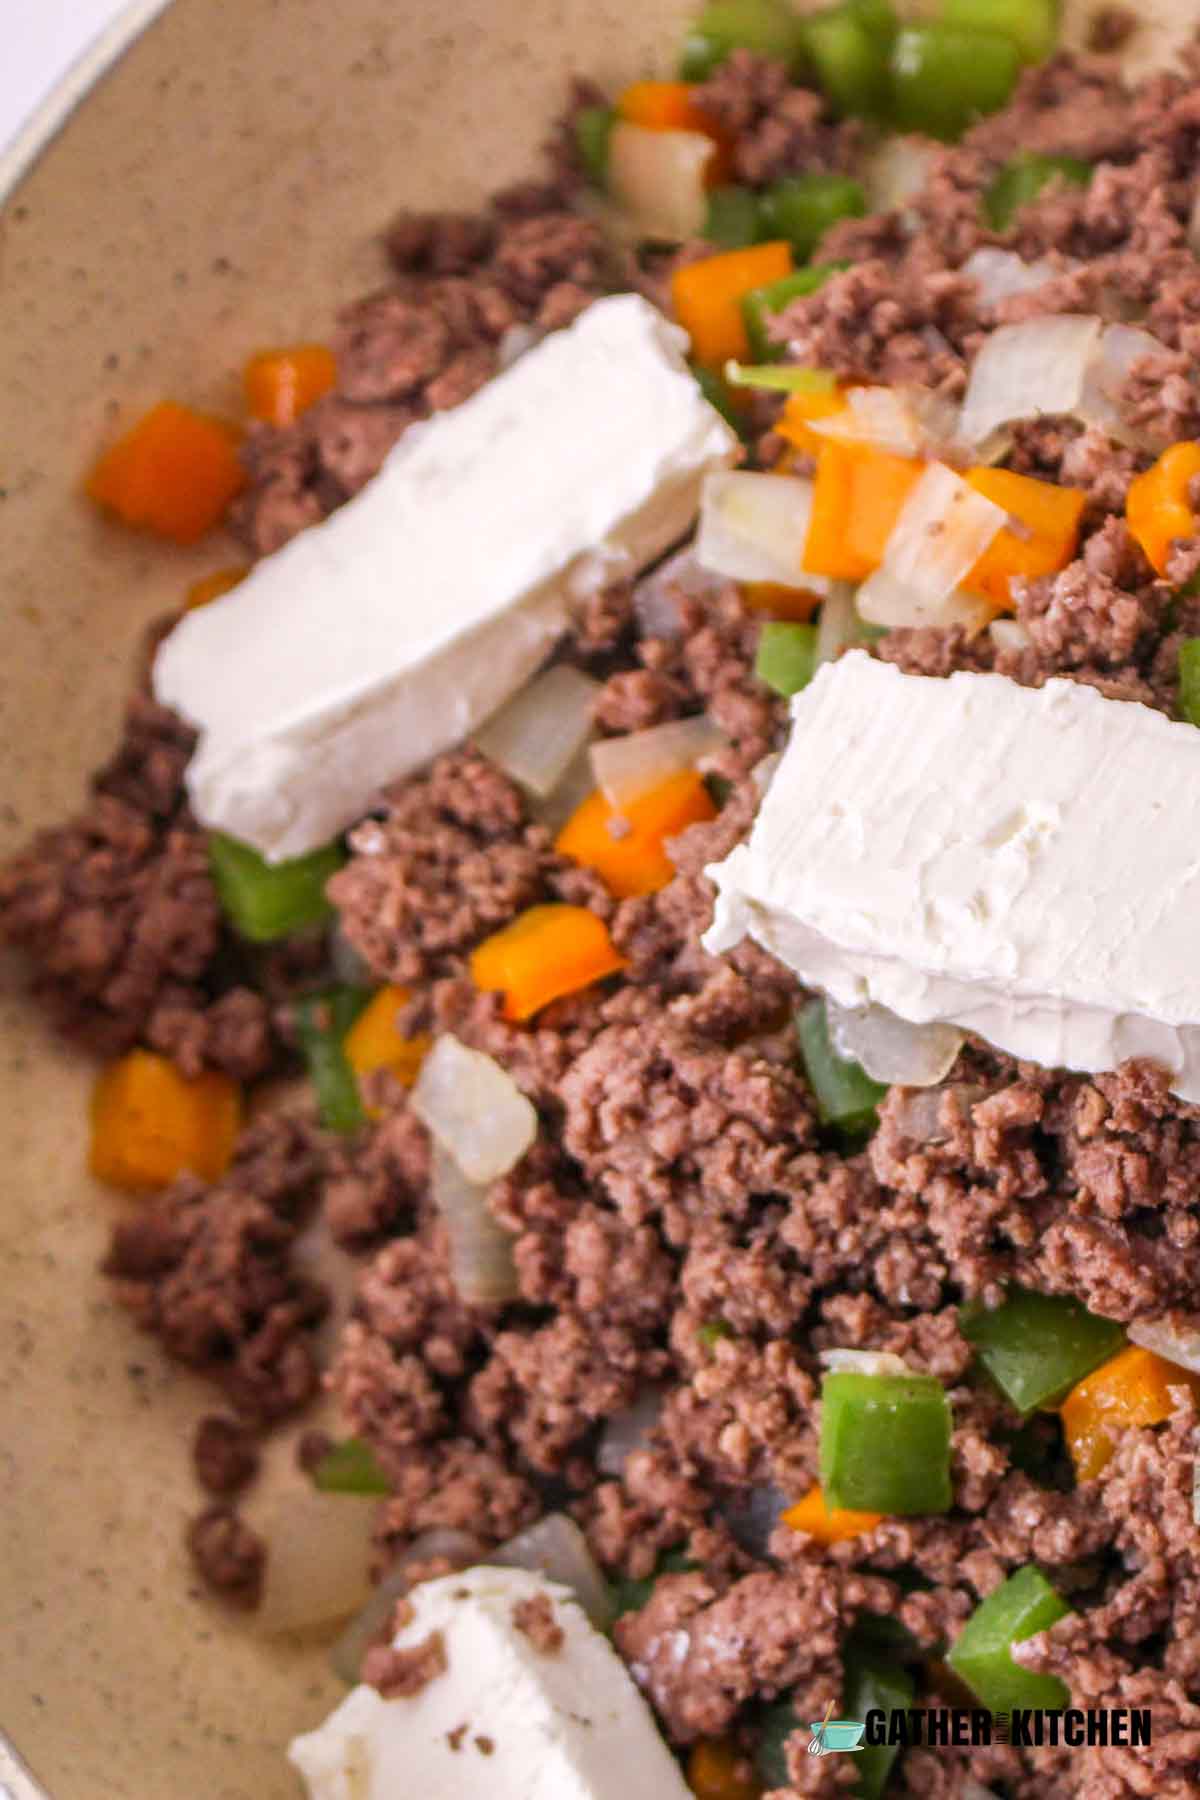 Slices of cream cheese on top of ground beef, onions and bell peppers.